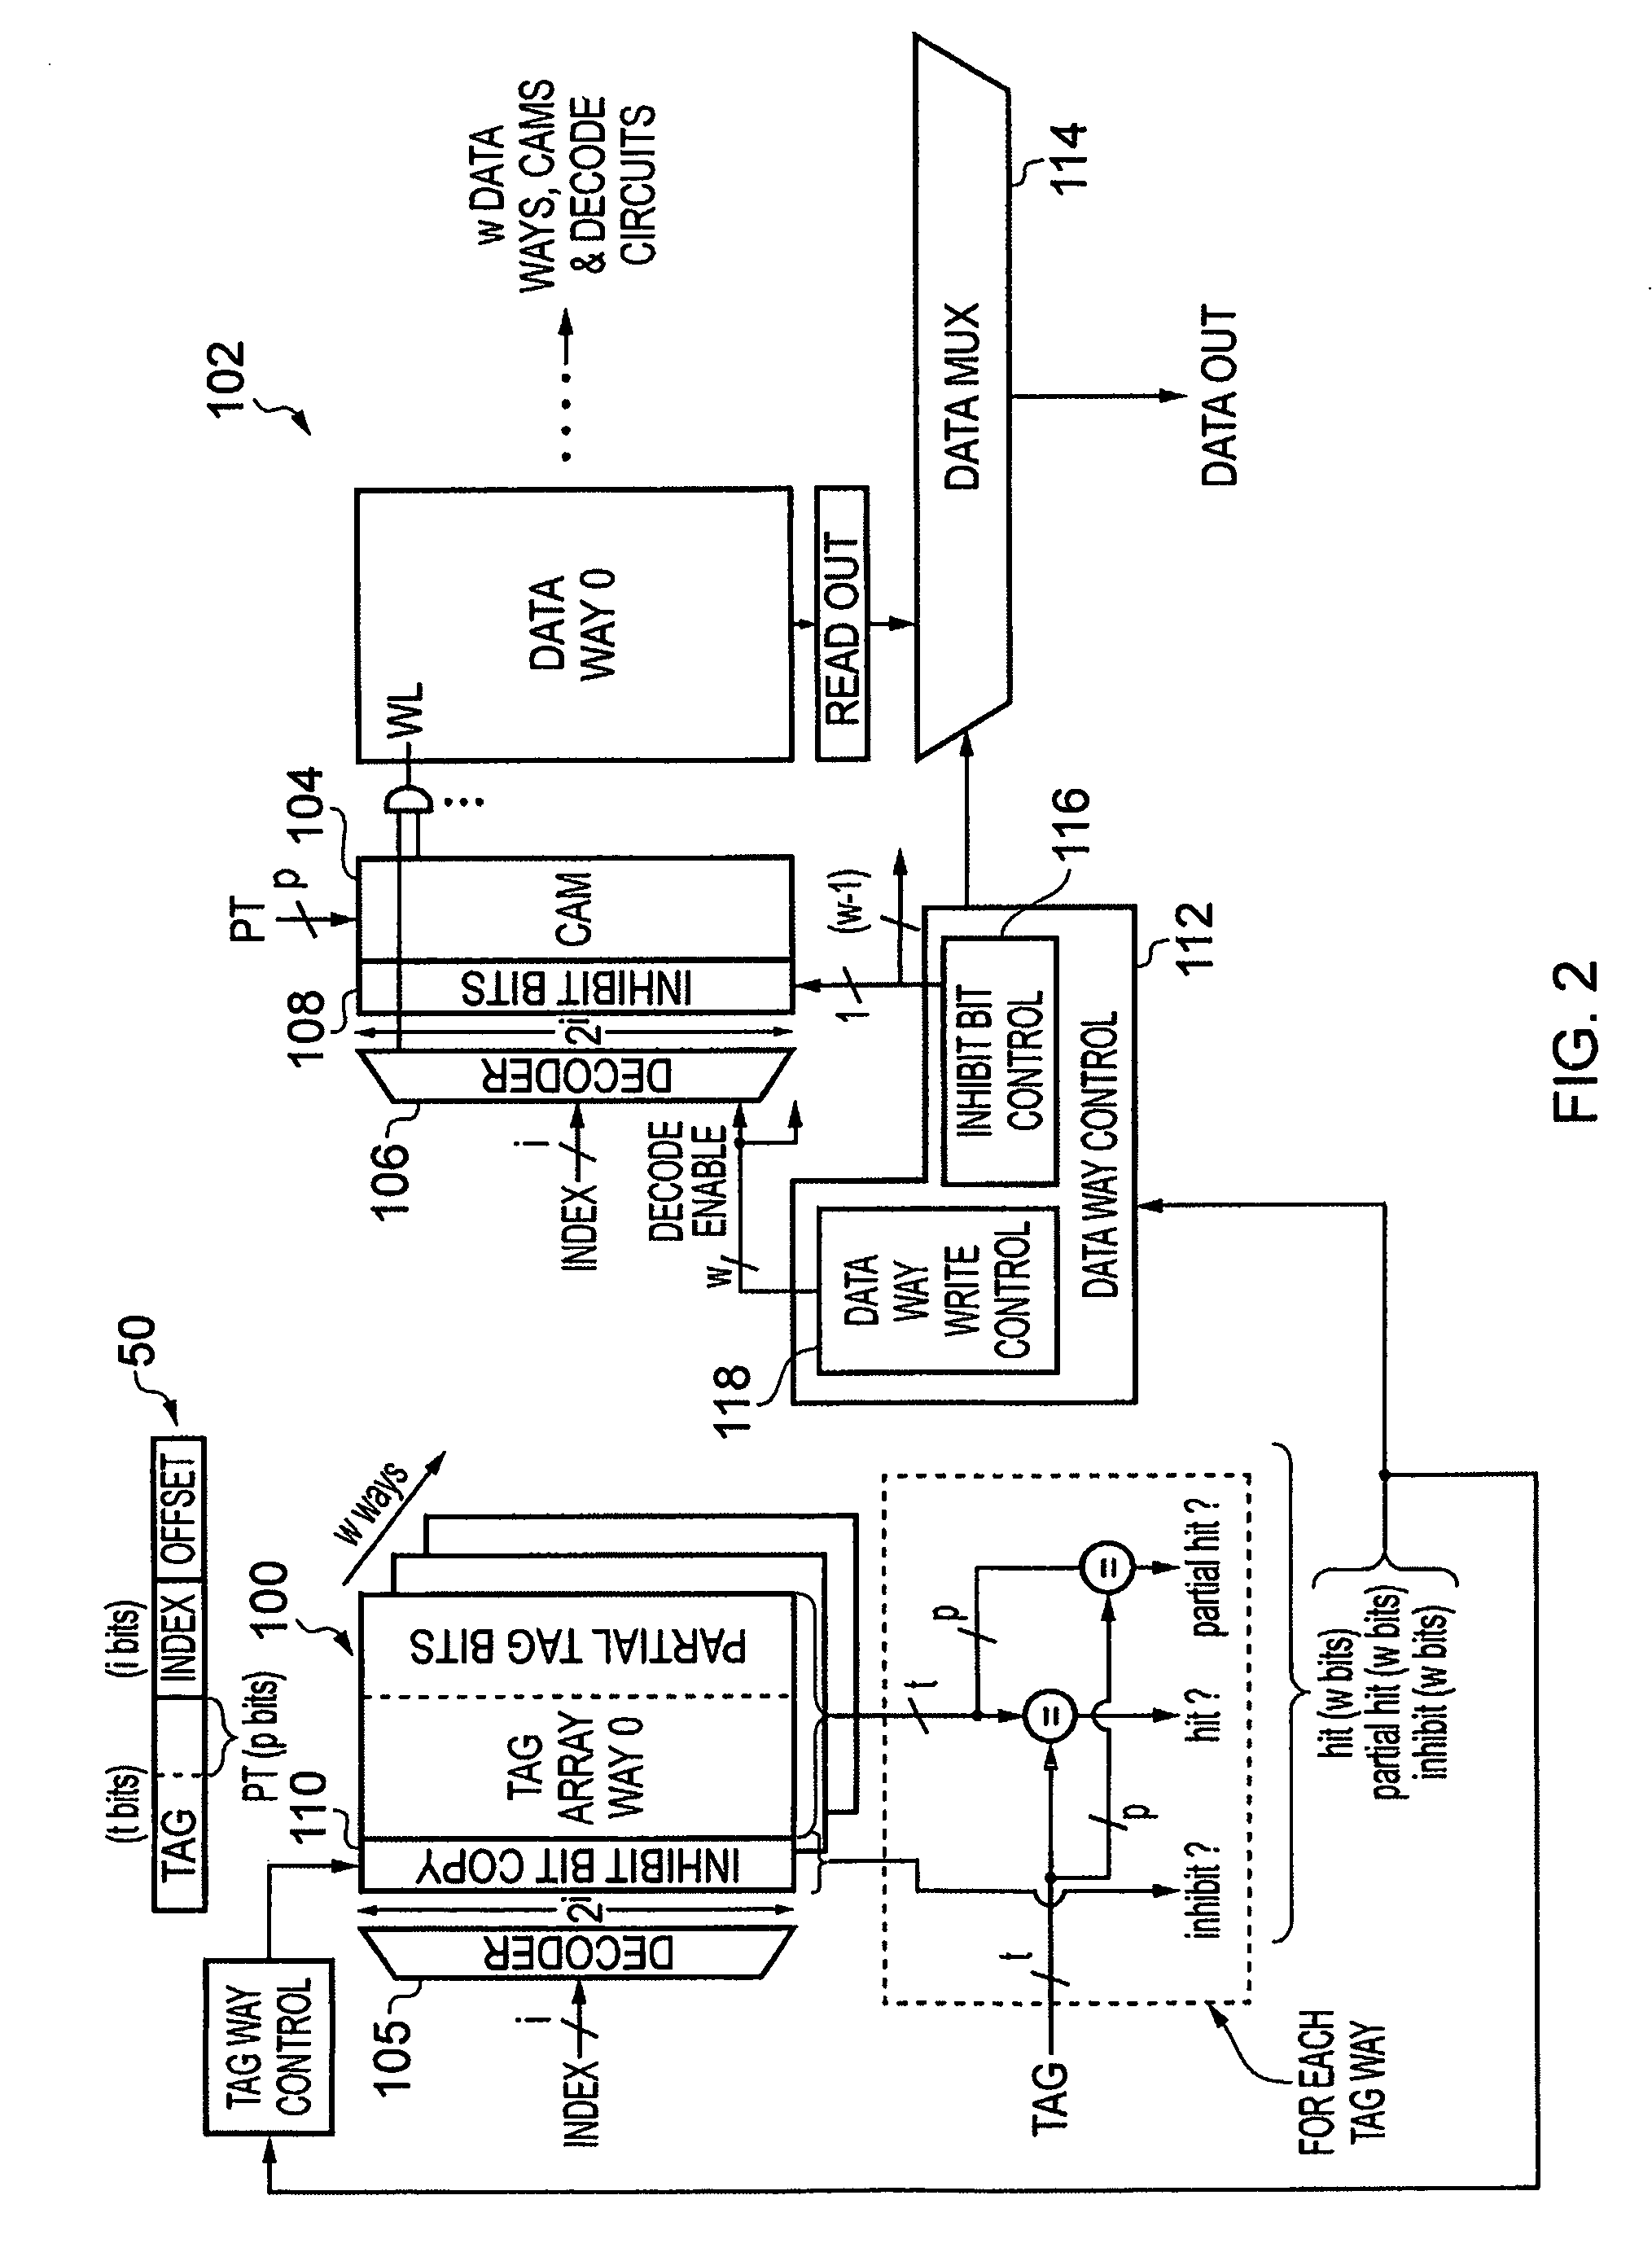 Data processing apparatus having a cache configured to perform tag lookup and data access in parallel, and a method of operating the data processing apparatus